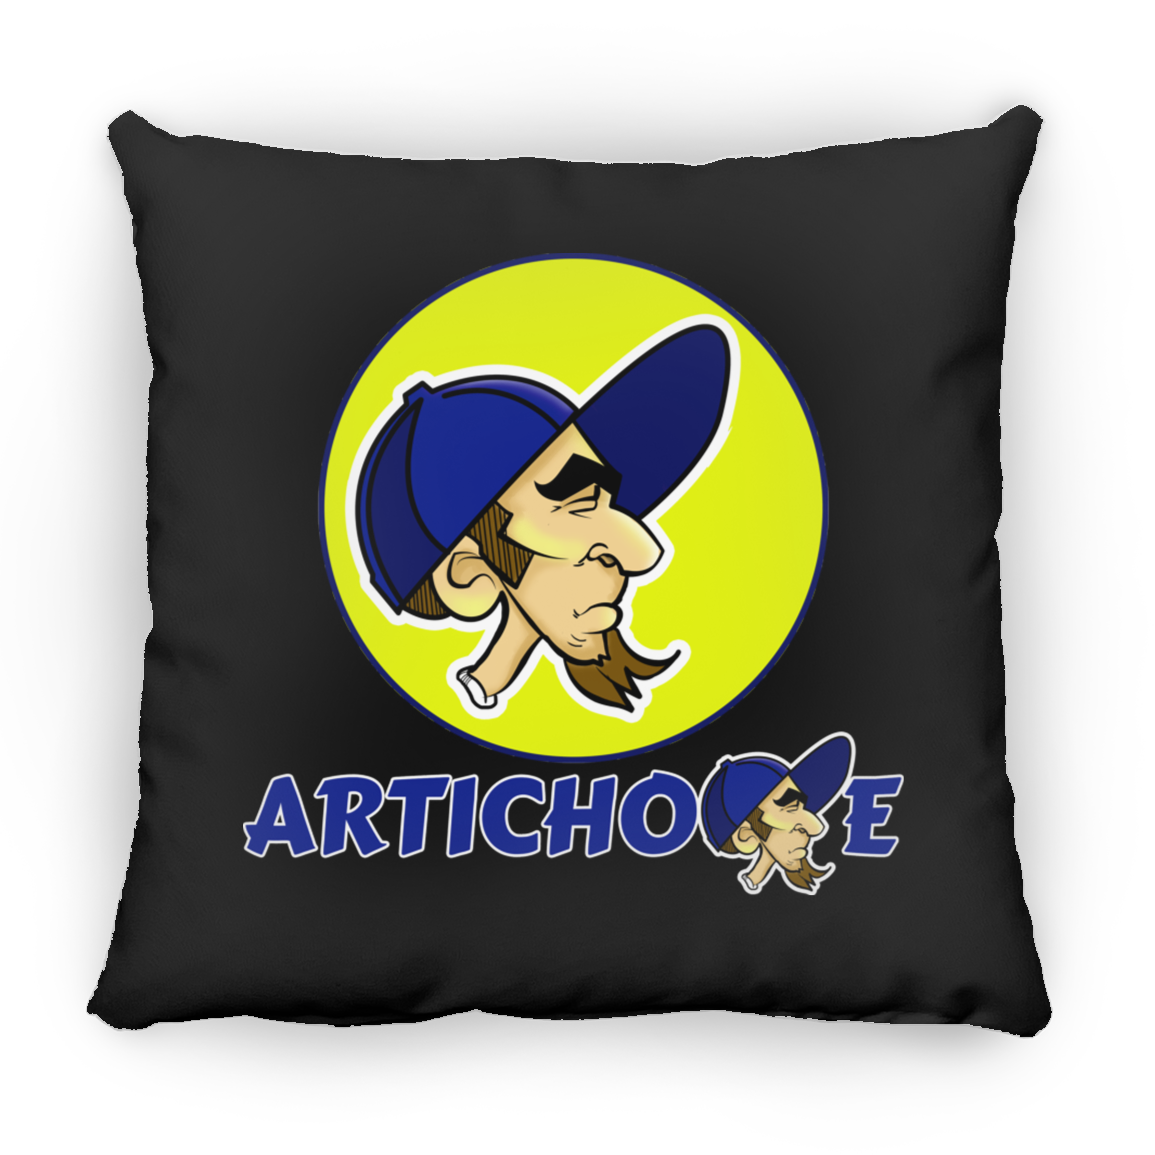 ZZ#20 ArtichokeUSA Characters and Fonts. "Clem" Let’s Create Your Own Design Today. Large Square Pillow